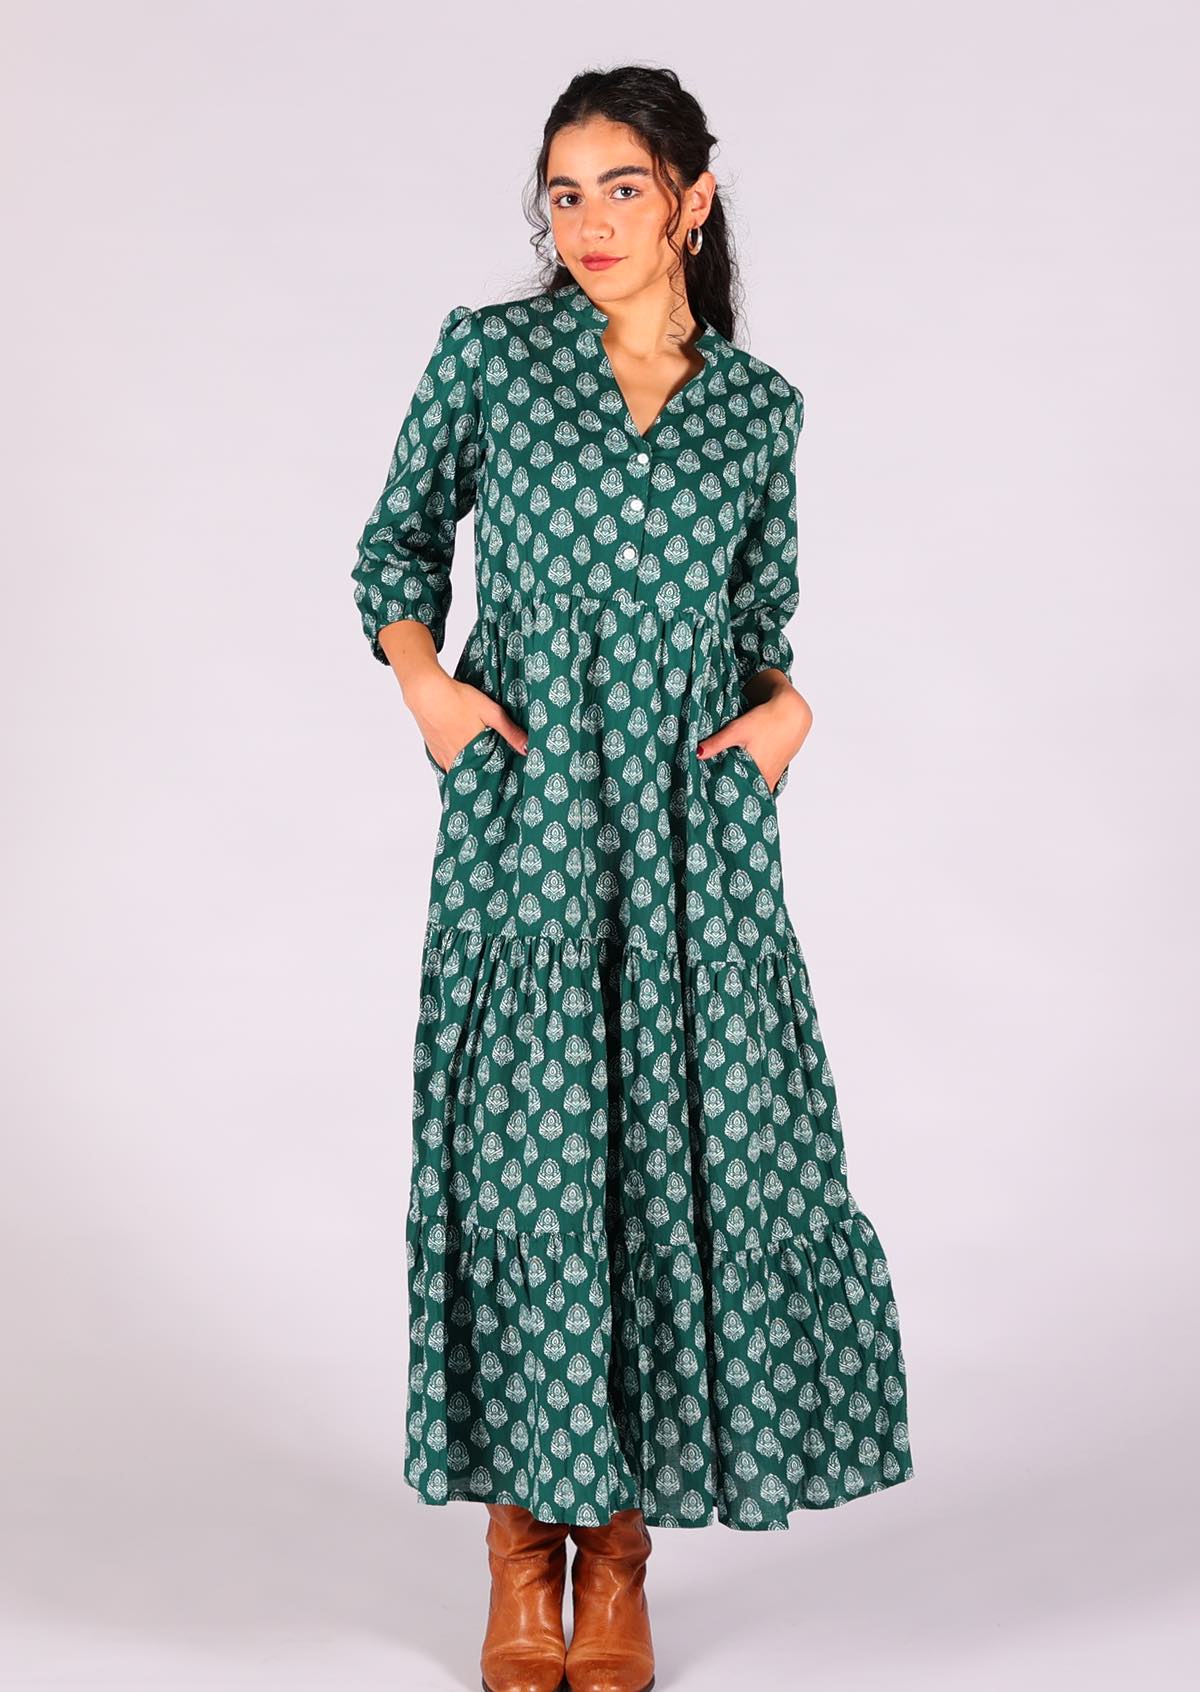 Striking boho cotton maxi dress with 3/4 sleeves,buttoned bodice with V-neck and mandarin collar